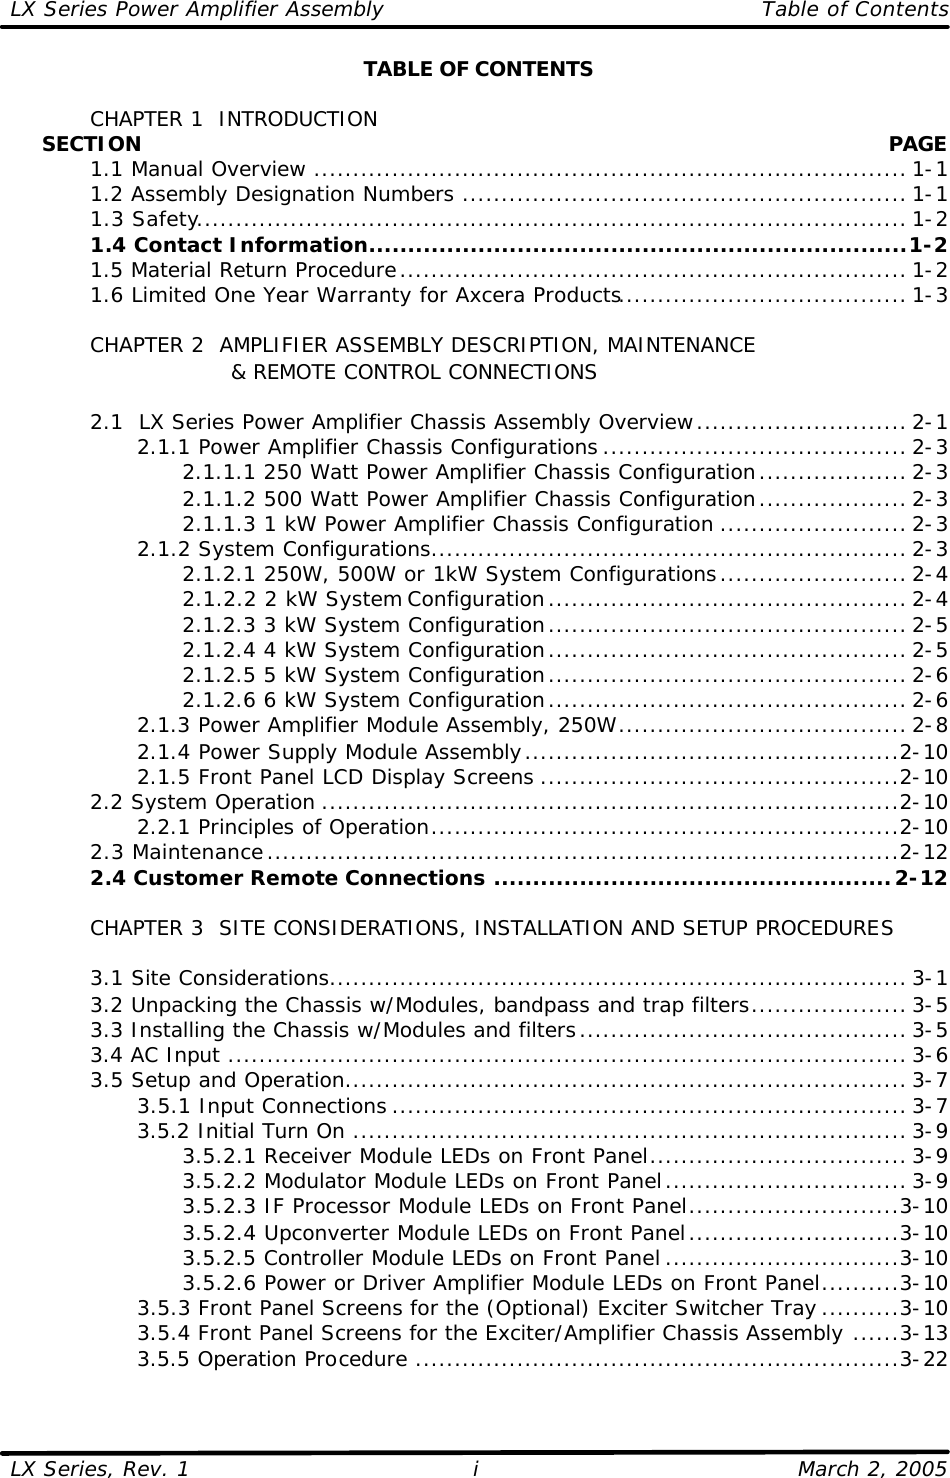 LX Series Power Amplifier Assembly    Table of Contents  LX Series, Rev. 1    March 2, 2005 i TABLE OF CONTENTS   CHAPTER 1  INTRODUCTION      SECTION    PAGE  1.1 Manual Overview ............................................................................ 1-1  1.2 Assembly Designation Numbers ......................................................... 1-1  1.3 Safety........................................................................................... 1-2  1.4 Contact Information.....................................................................1-2  1.5 Material Return Procedure................................................................. 1-2  1.6 Limited One Year Warranty for Axcera Products..................................... 1-3   CHAPTER 2  AMPLIFIER ASSEMBLY DESCRIPTION, MAINTENANCE                 &amp; REMOTE CONTROL CONNECTIONS   2.1  LX Series Power Amplifier Chassis Assembly Overview........................... 2-1     2.1.1 Power Amplifier Chassis Configurations ....................................... 2-3       2.1.1.1 250 Watt Power Amplifier Chassis Configuration................... 2-3       2.1.1.2 500 Watt Power Amplifier Chassis Configuration................... 2-3       2.1.1.3 1 kW Power Amplifier Chassis Configuration ........................ 2-3     2.1.2 System Configurations............................................................. 2-3       2.1.2.1 250W, 500W or 1kW System Configurations........................ 2-4       2.1.2.2 2 kW System Configuration.............................................. 2-4       2.1.2.3 3 kW System Configuration.............................................. 2-5       2.1.2.4 4 kW System Configuration.............................................. 2-5       2.1.2.5 5 kW System Configuration.............................................. 2-6       2.1.2.6 6 kW System Configuration.............................................. 2-6     2.1.3 Power Amplifier Module Assembly, 250W..................................... 2-8     2.1.4 Power Supply Module Assembly................................................2-10     2.1.5 Front Panel LCD Display Screens ..............................................2-10  2.2 System Operation ..........................................................................2-10     2.2.1 Principles of Operation............................................................2-10  2.3 Maintenance.................................................................................2-12  2.4 Customer Remote Connections ...................................................2-12       CHAPTER 3  SITE CONSIDERATIONS, INSTALLATION AND SETUP PROCEDURES     3.1 Site Considerations.......................................................................... 3-1  3.2 Unpacking the Chassis w/Modules, bandpass and trap filters.................... 3-5  3.3 Installing the Chassis w/Modules and filters.......................................... 3-5  3.4 AC Input ....................................................................................... 3-6  3.5 Setup and Operation........................................................................ 3-7     3.5.1 Input Connections .................................................................. 3-7     3.5.2 Initial Turn On ....................................................................... 3-9       3.5.2.1 Receiver Module LEDs on Front Panel................................. 3-9       3.5.2.2 Modulator Module LEDs on Front Panel............................... 3-9       3.5.2.3 IF Processor Module LEDs on Front Panel...........................3-10       3.5.2.4 Upconverter Module LEDs on Front Panel...........................3-10       3.5.2.5 Controller Module LEDs on Front Panel ..............................3-10       3.5.2.6 Power or Driver Amplifier Module LEDs on Front Panel..........3-10     3.5.3 Front Panel Screens for the (Optional) Exciter Switcher Tray ..........3-10     3.5.4 Front Panel Screens for the Exciter/Amplifier Chassis Assembly ......3-13     3.5.5 Operation Procedure ..............................................................3-22  